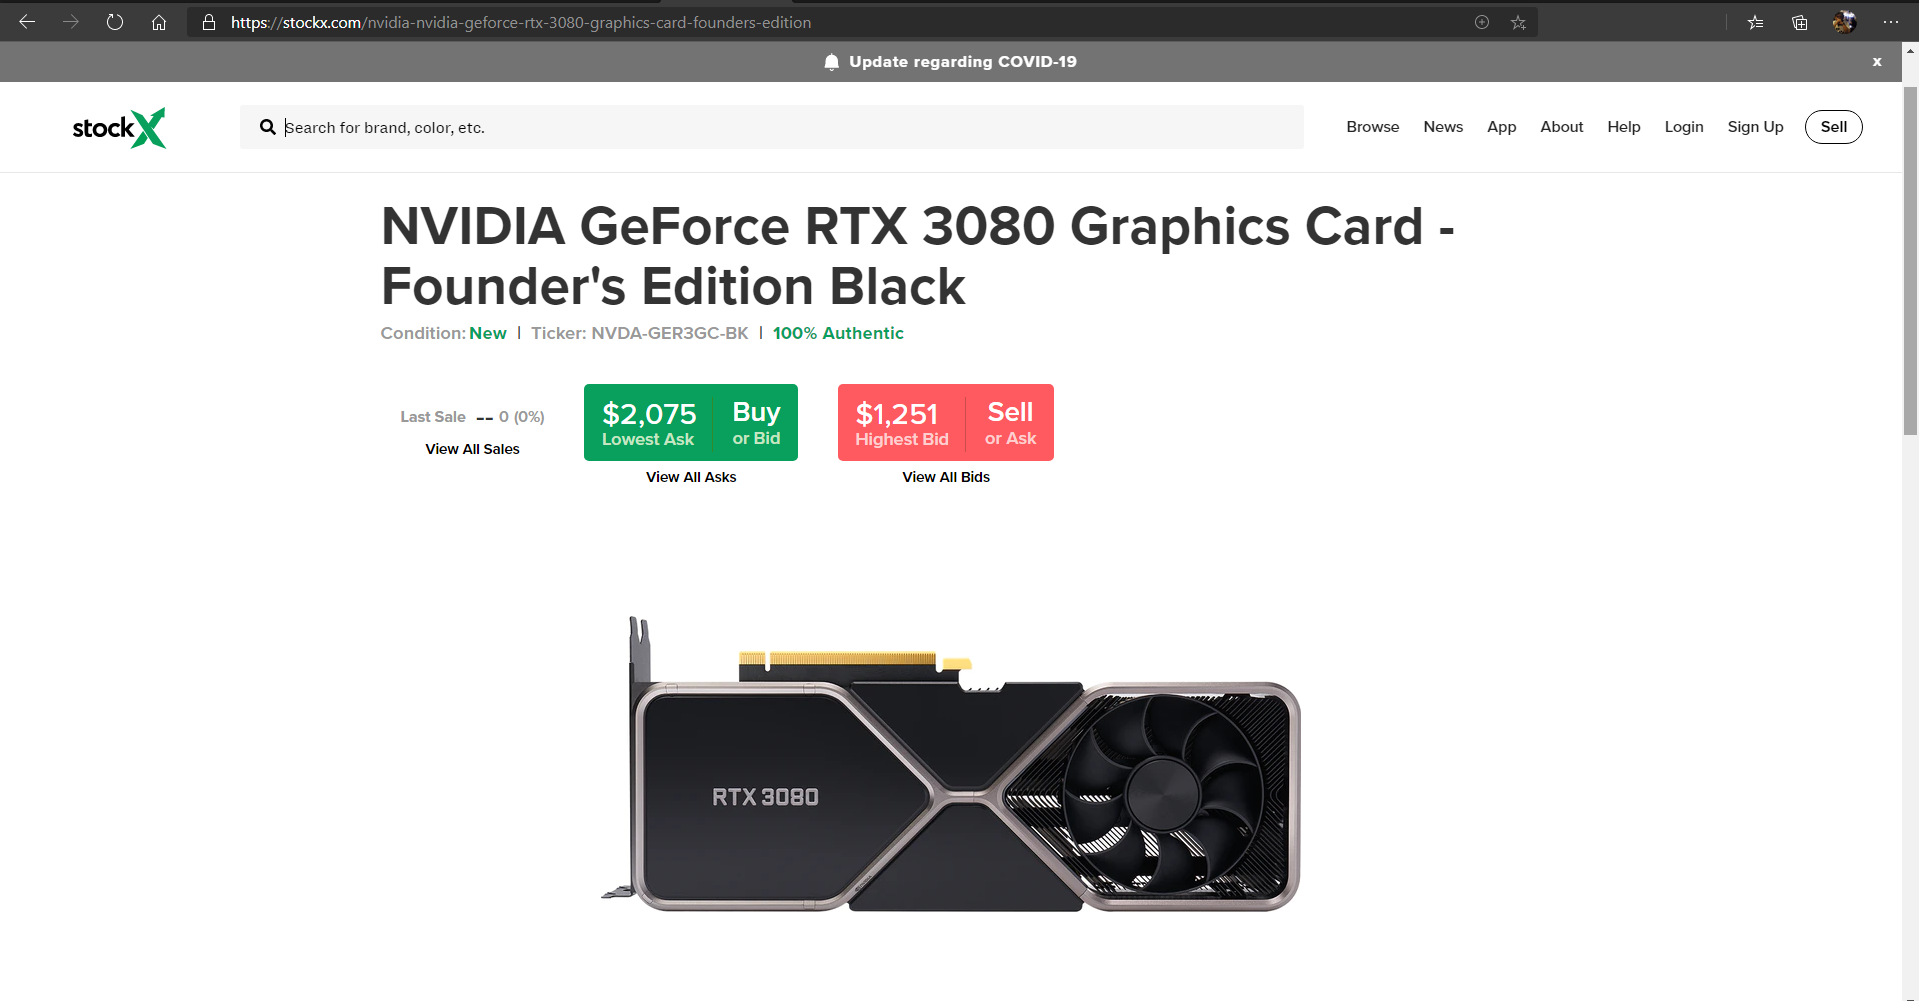 Nvidia GeForce RTX 3080 GPUs Gets Listed on StockX